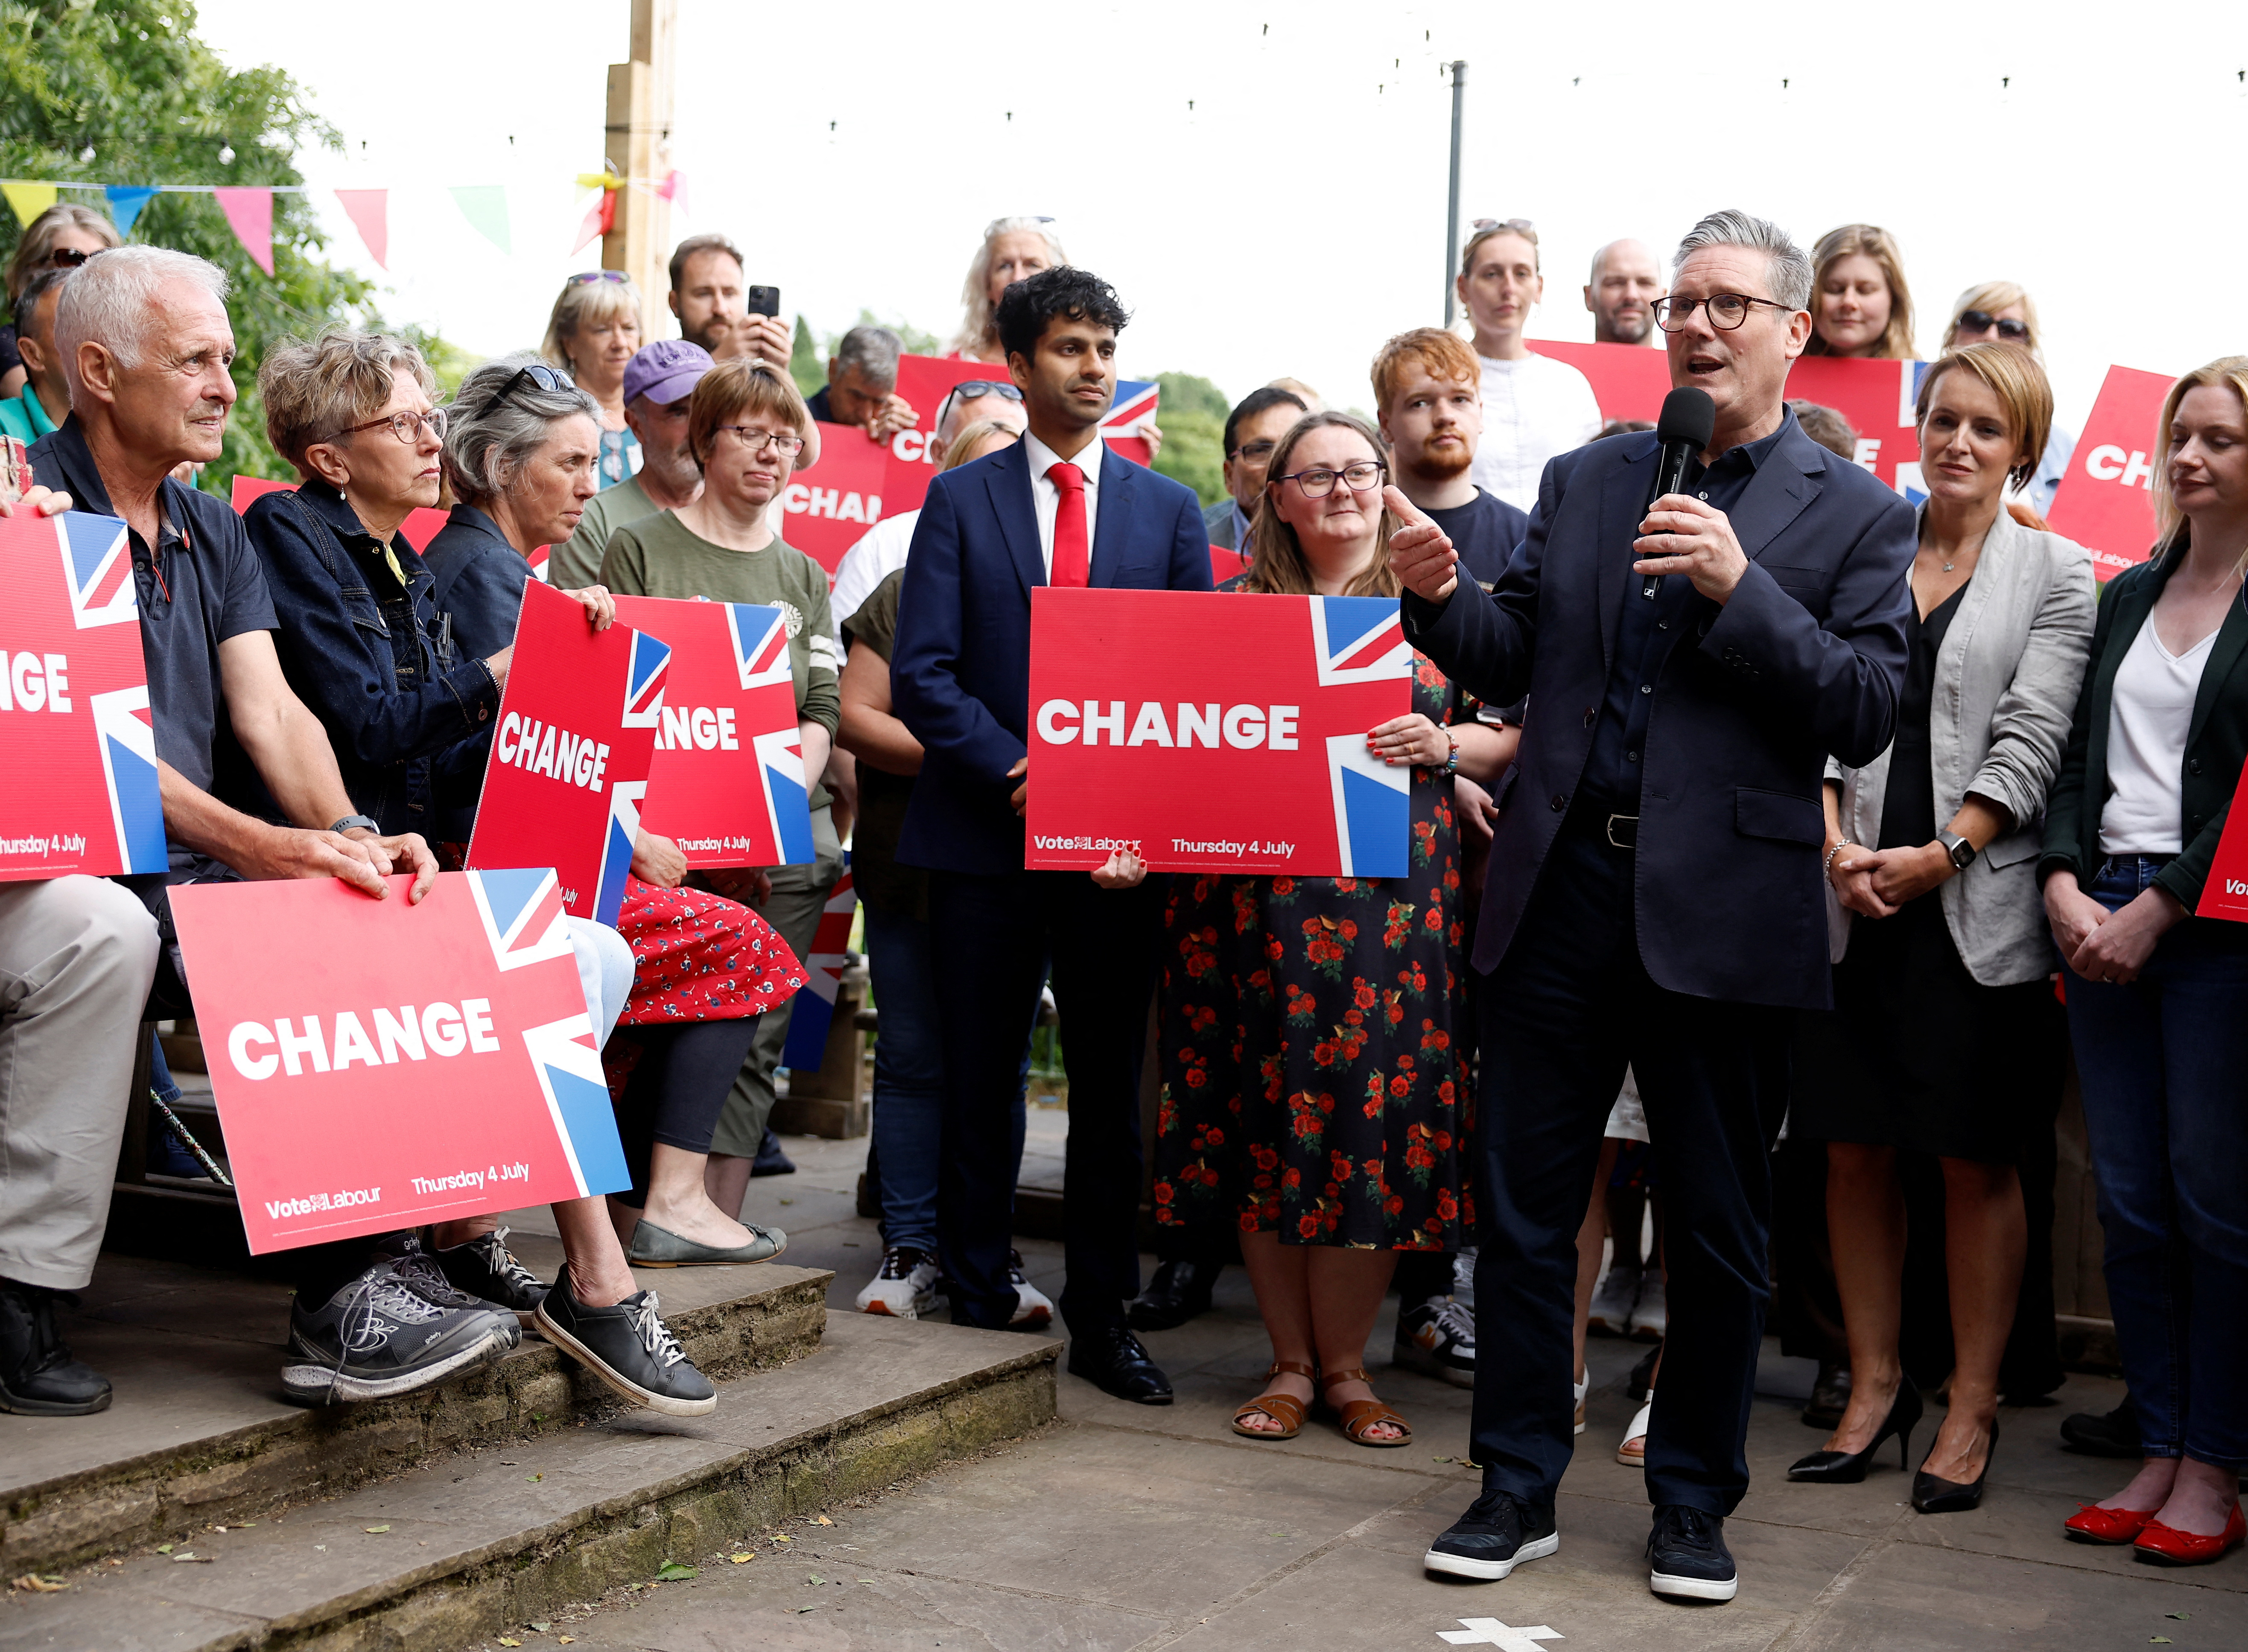 British opposition Labour Party leader Starmer attends a general election campaign event in Cheshire